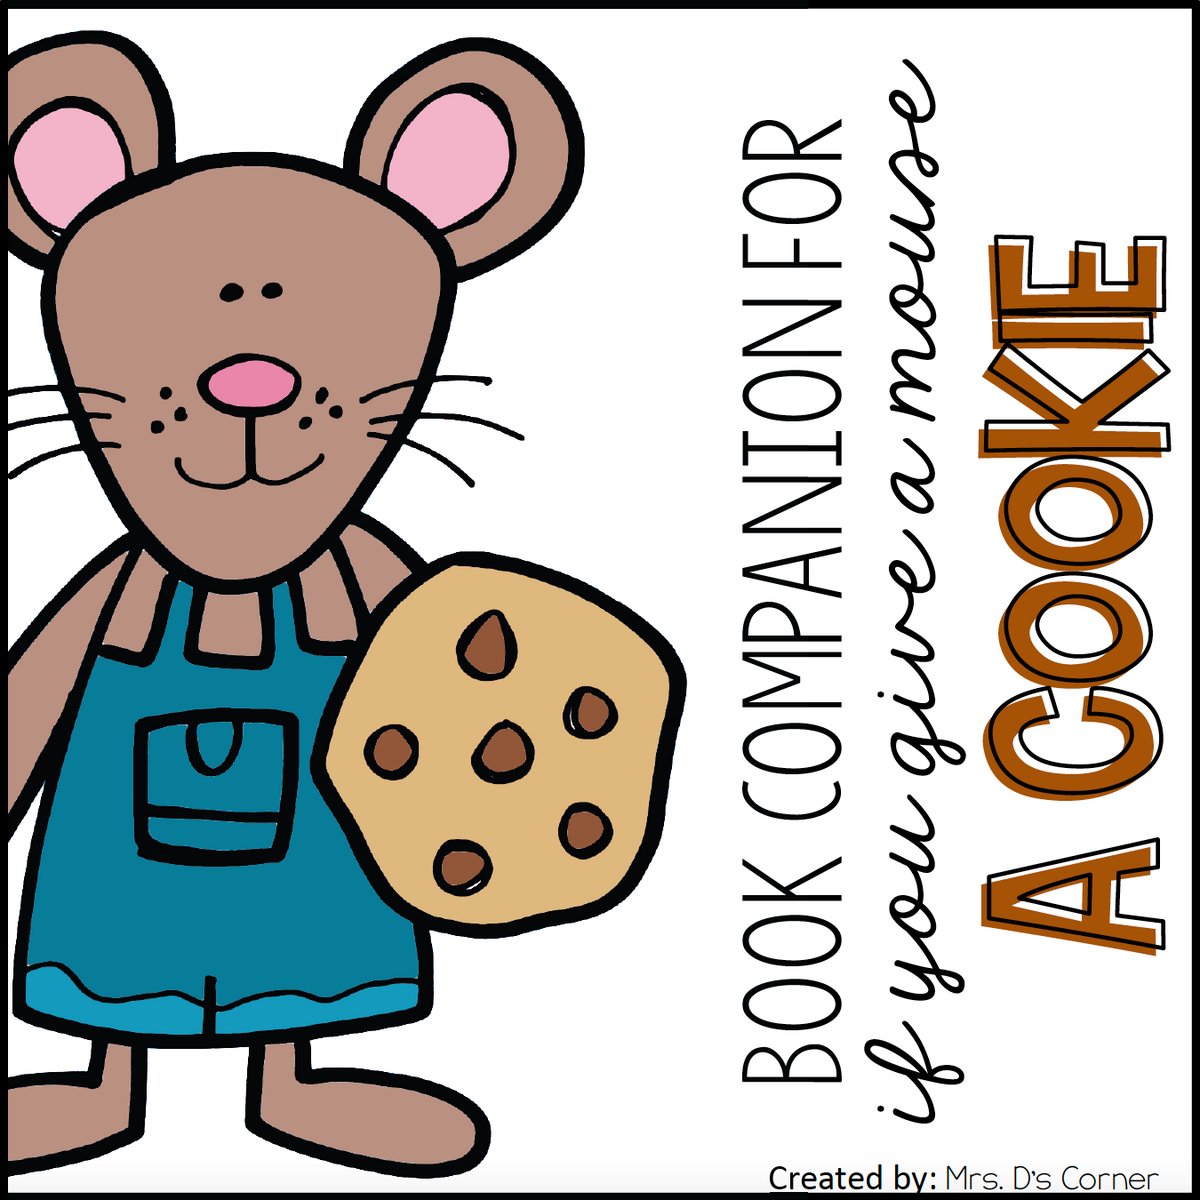 if you give a mouse a cookie full book